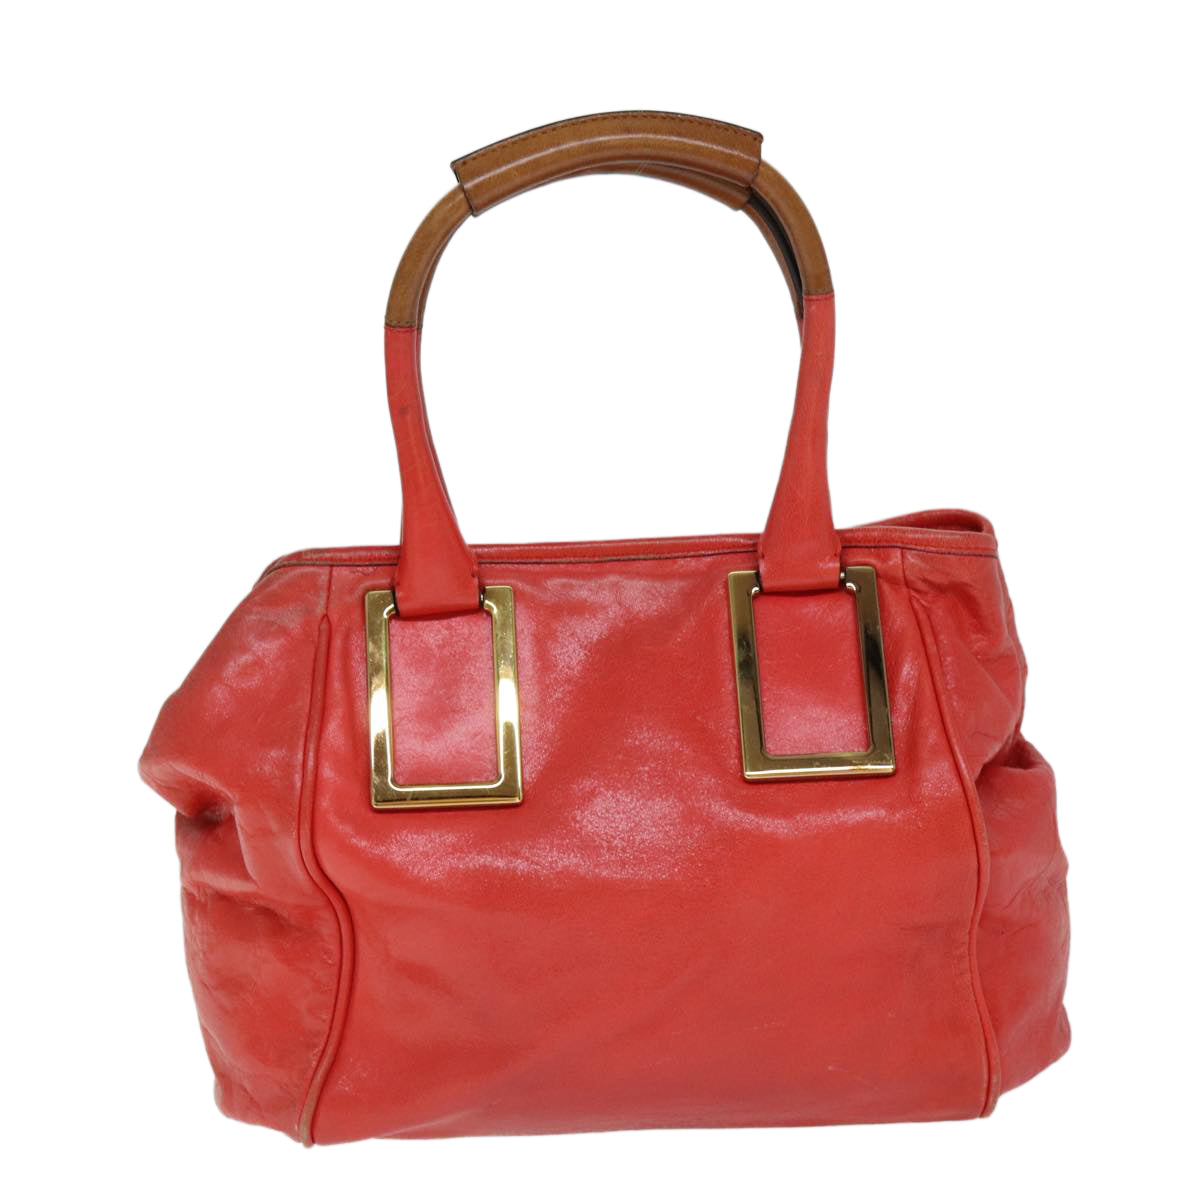 Chloe Etel Hand Bag Leather Red Auth yk12587 - 0